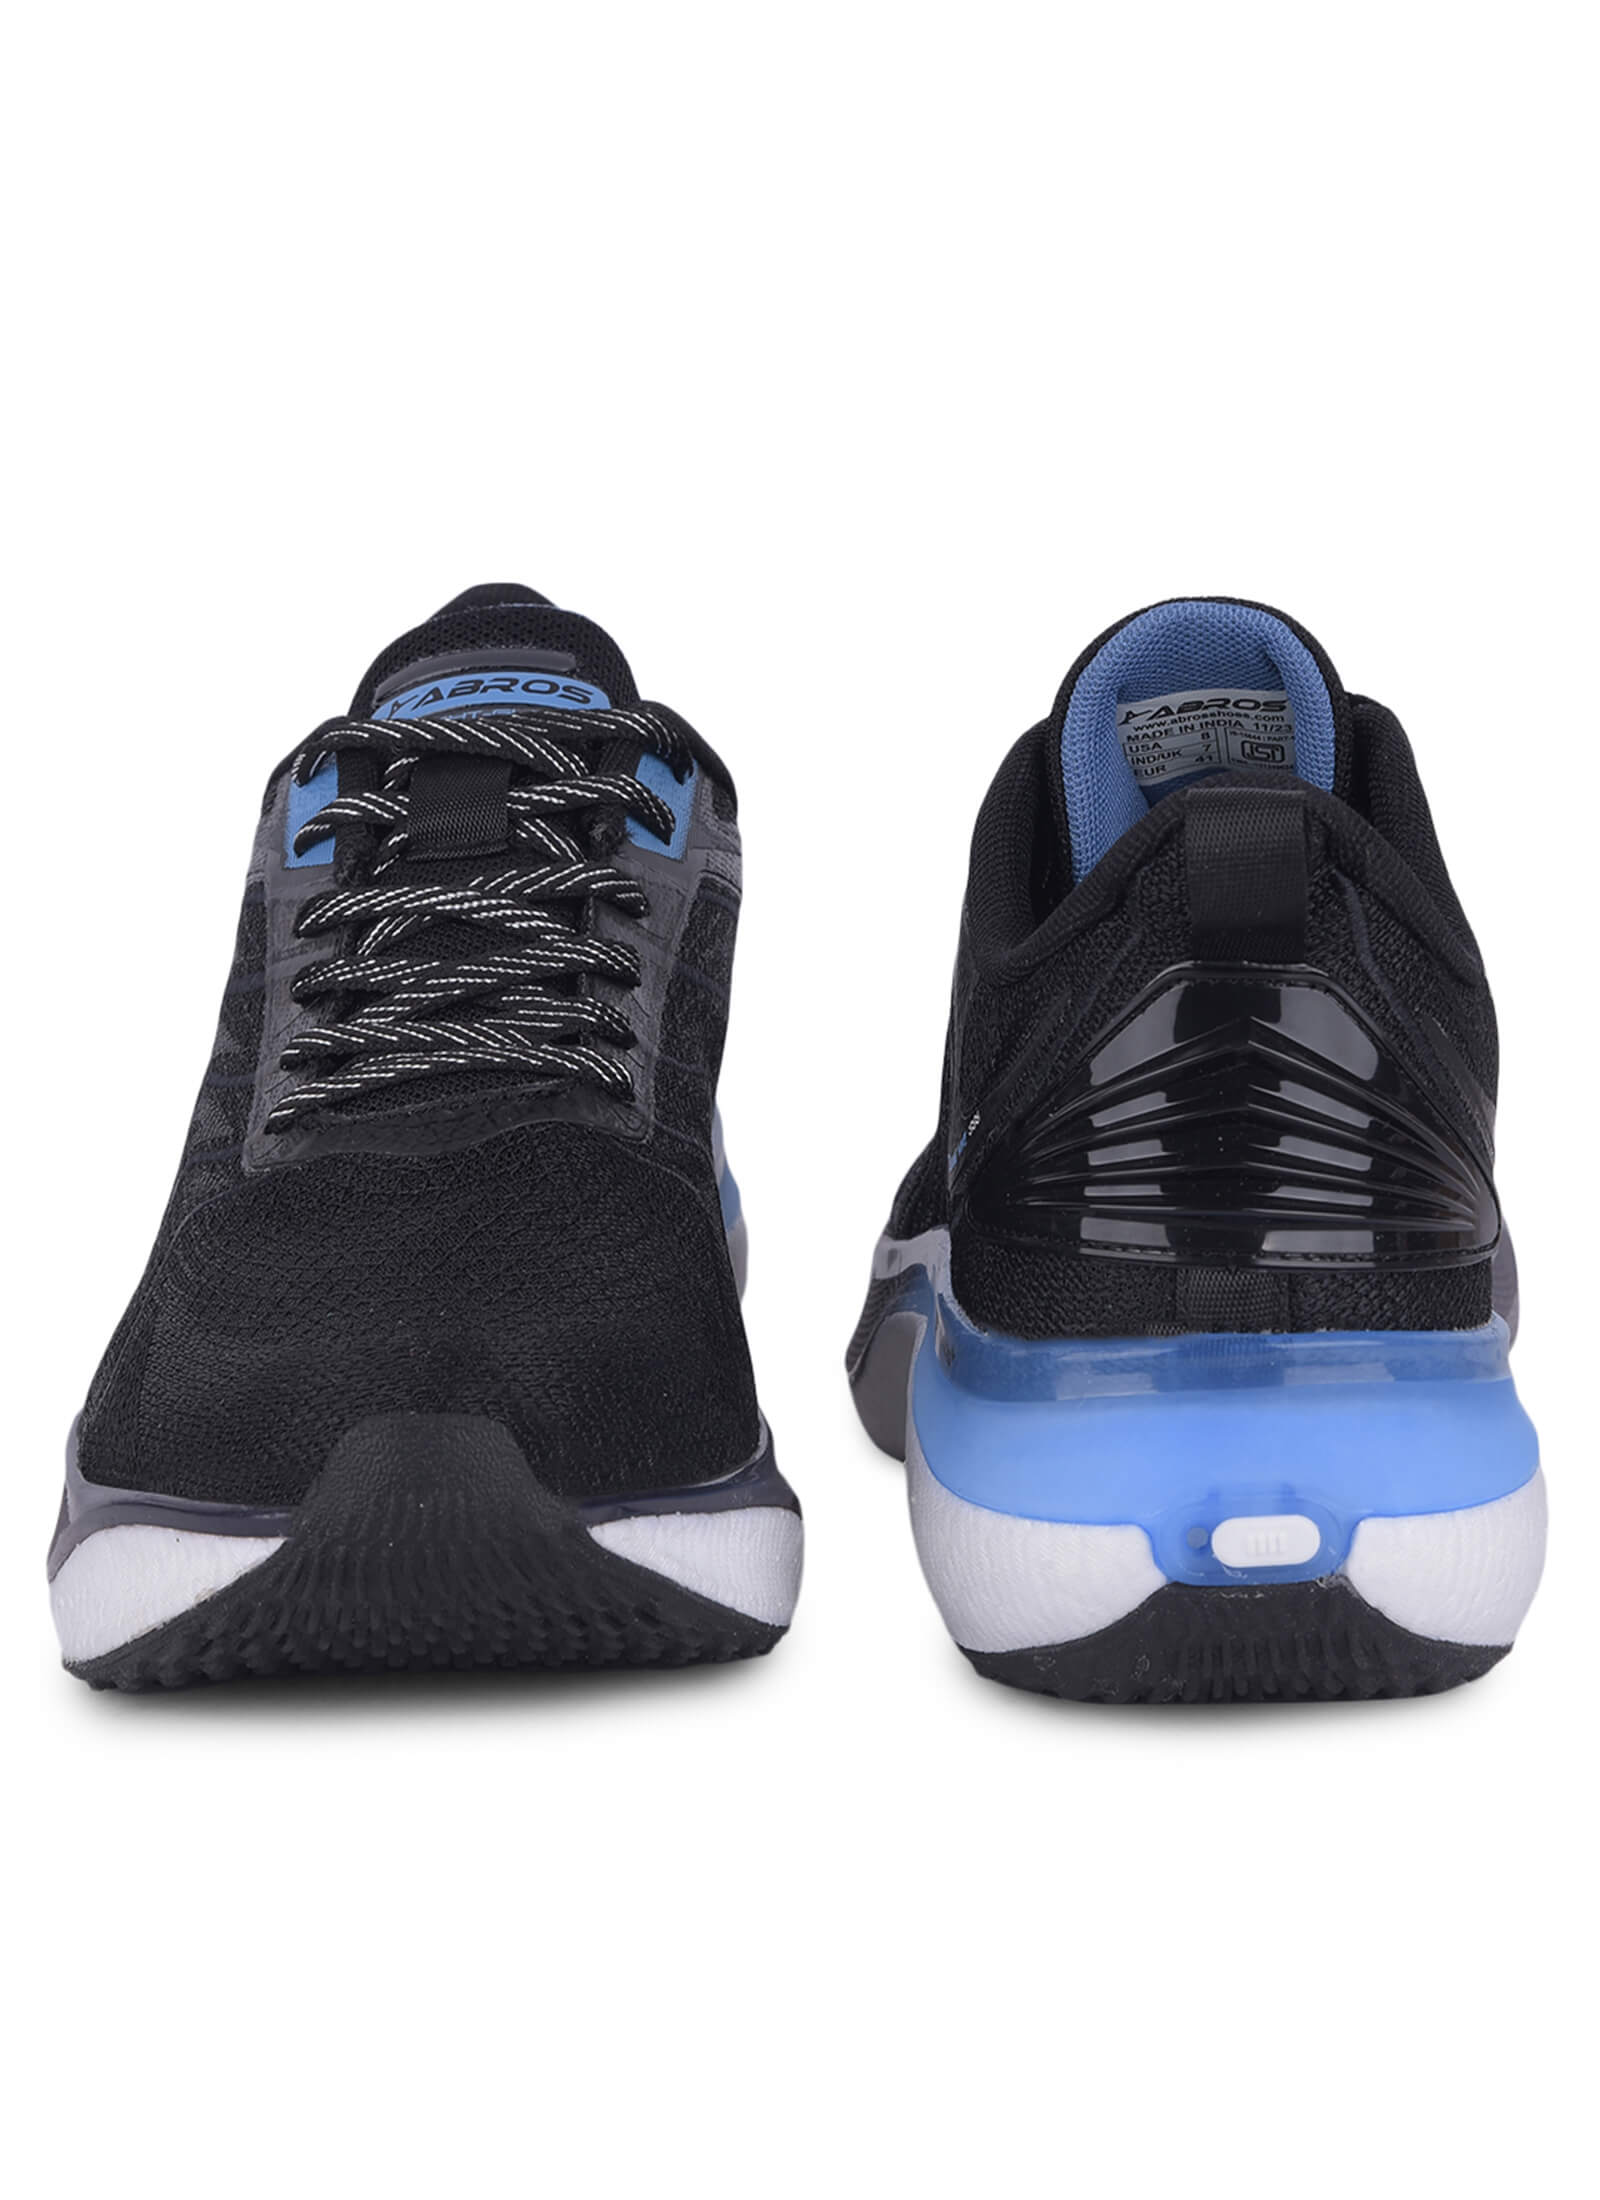 Crypto Hyper Fuse Sports Shoes For Men